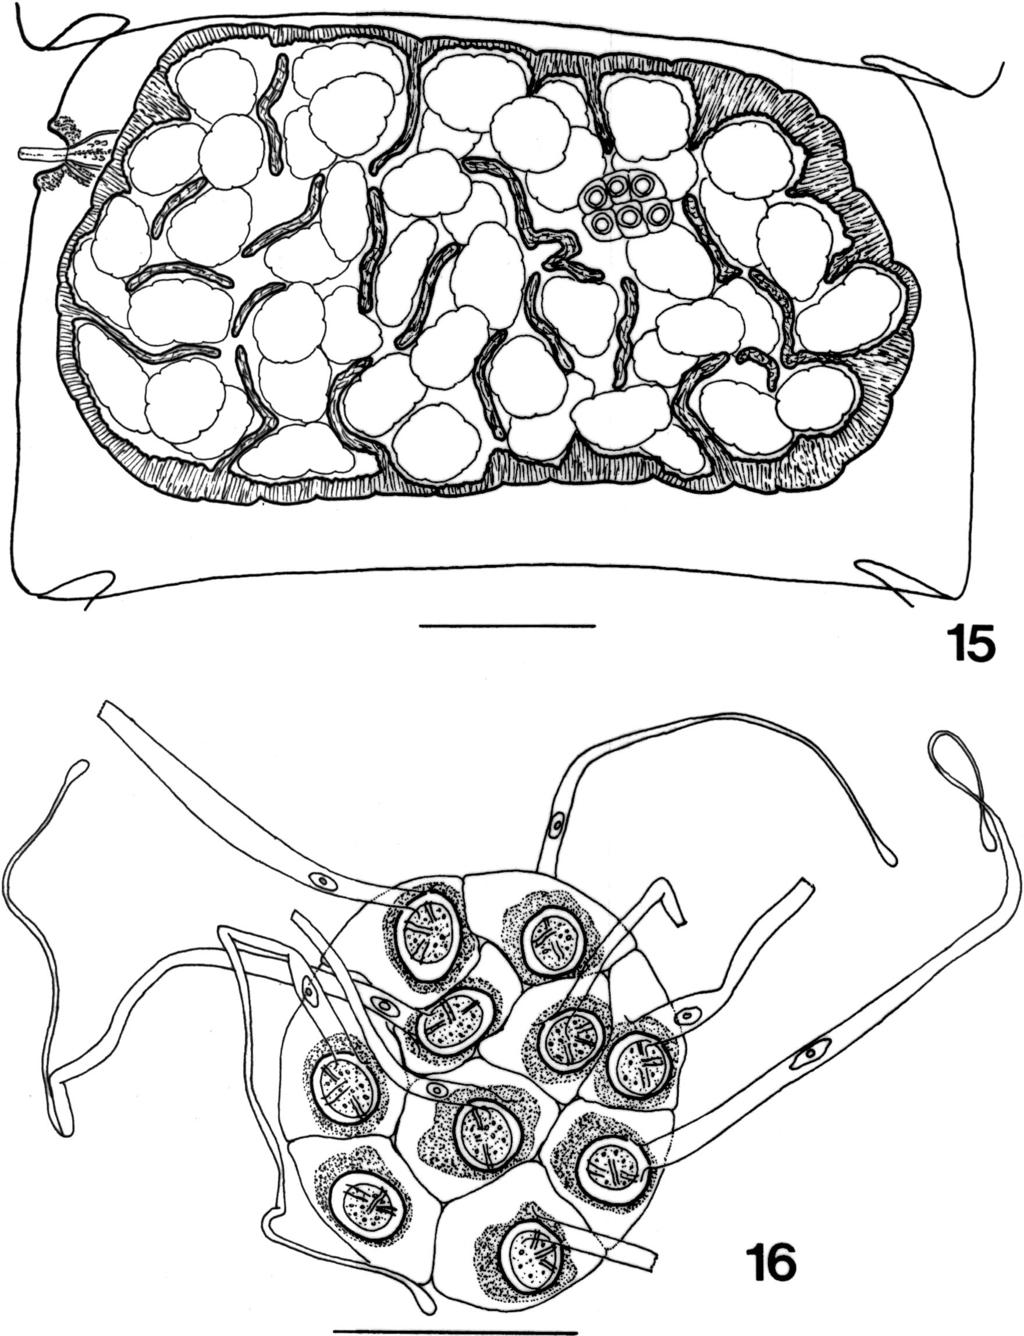 1082 THE JOURNAL OF PARASITOLOGY, VOL. 90, NO. 5, OCTOBER 2004 FIGURES 15 16. Cinclotaenia boliviensis n. sp. 15. Gravid proglottid. 16. Egg packets examined in distilled water. Bar 250 m (Fig.